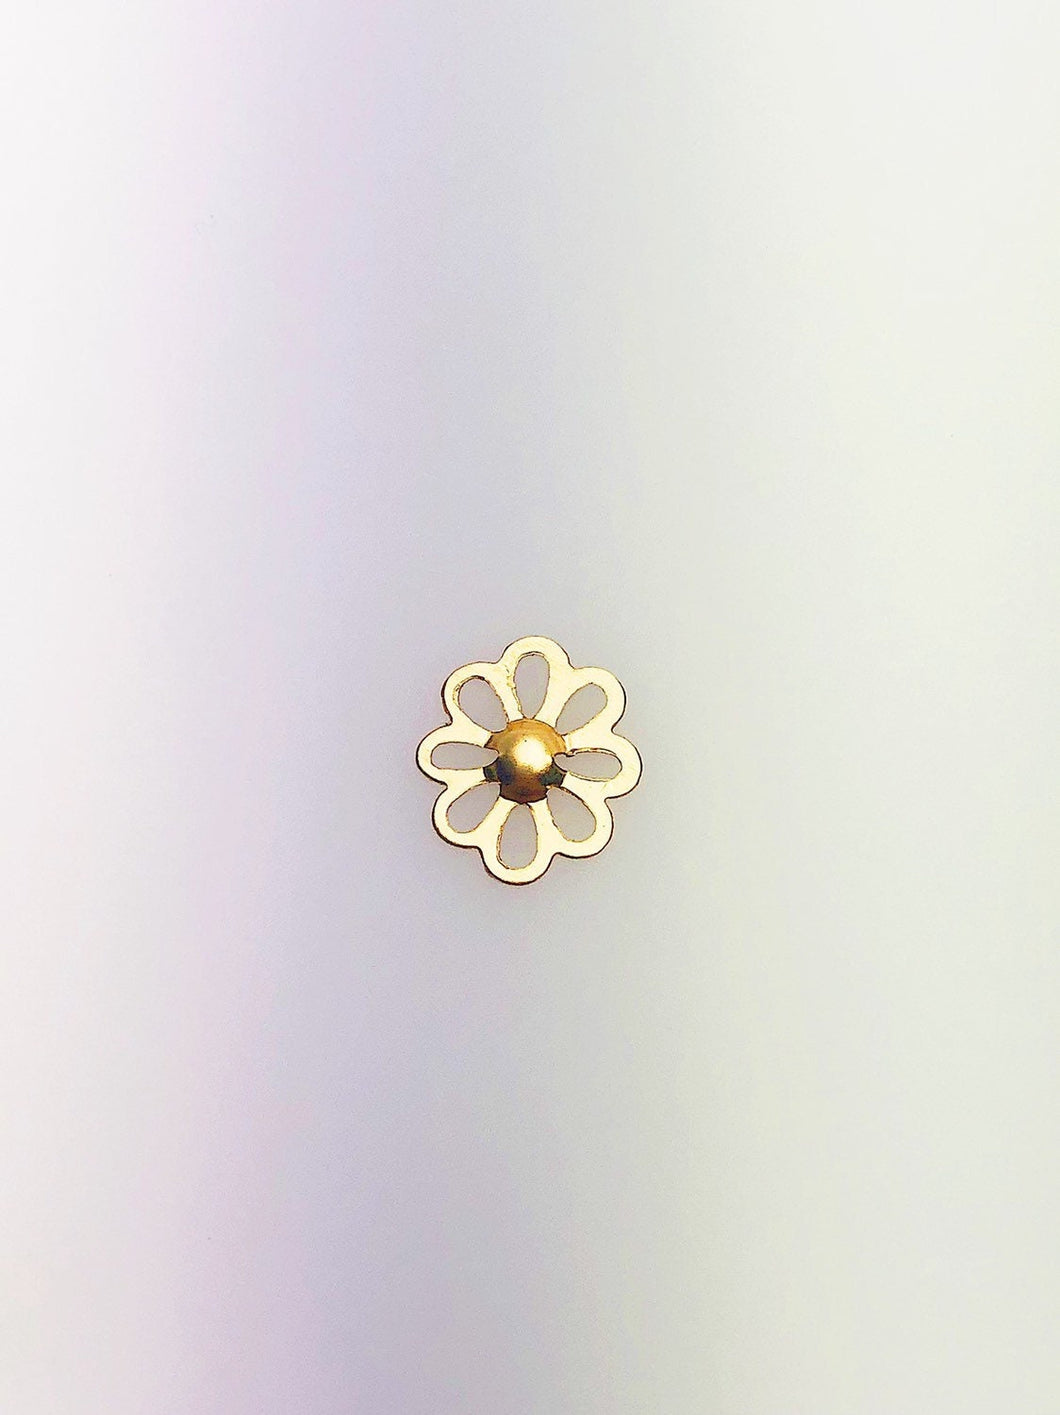 14K Gold Fill Flower Charm, 10.2x9mm, Made in USA - 189